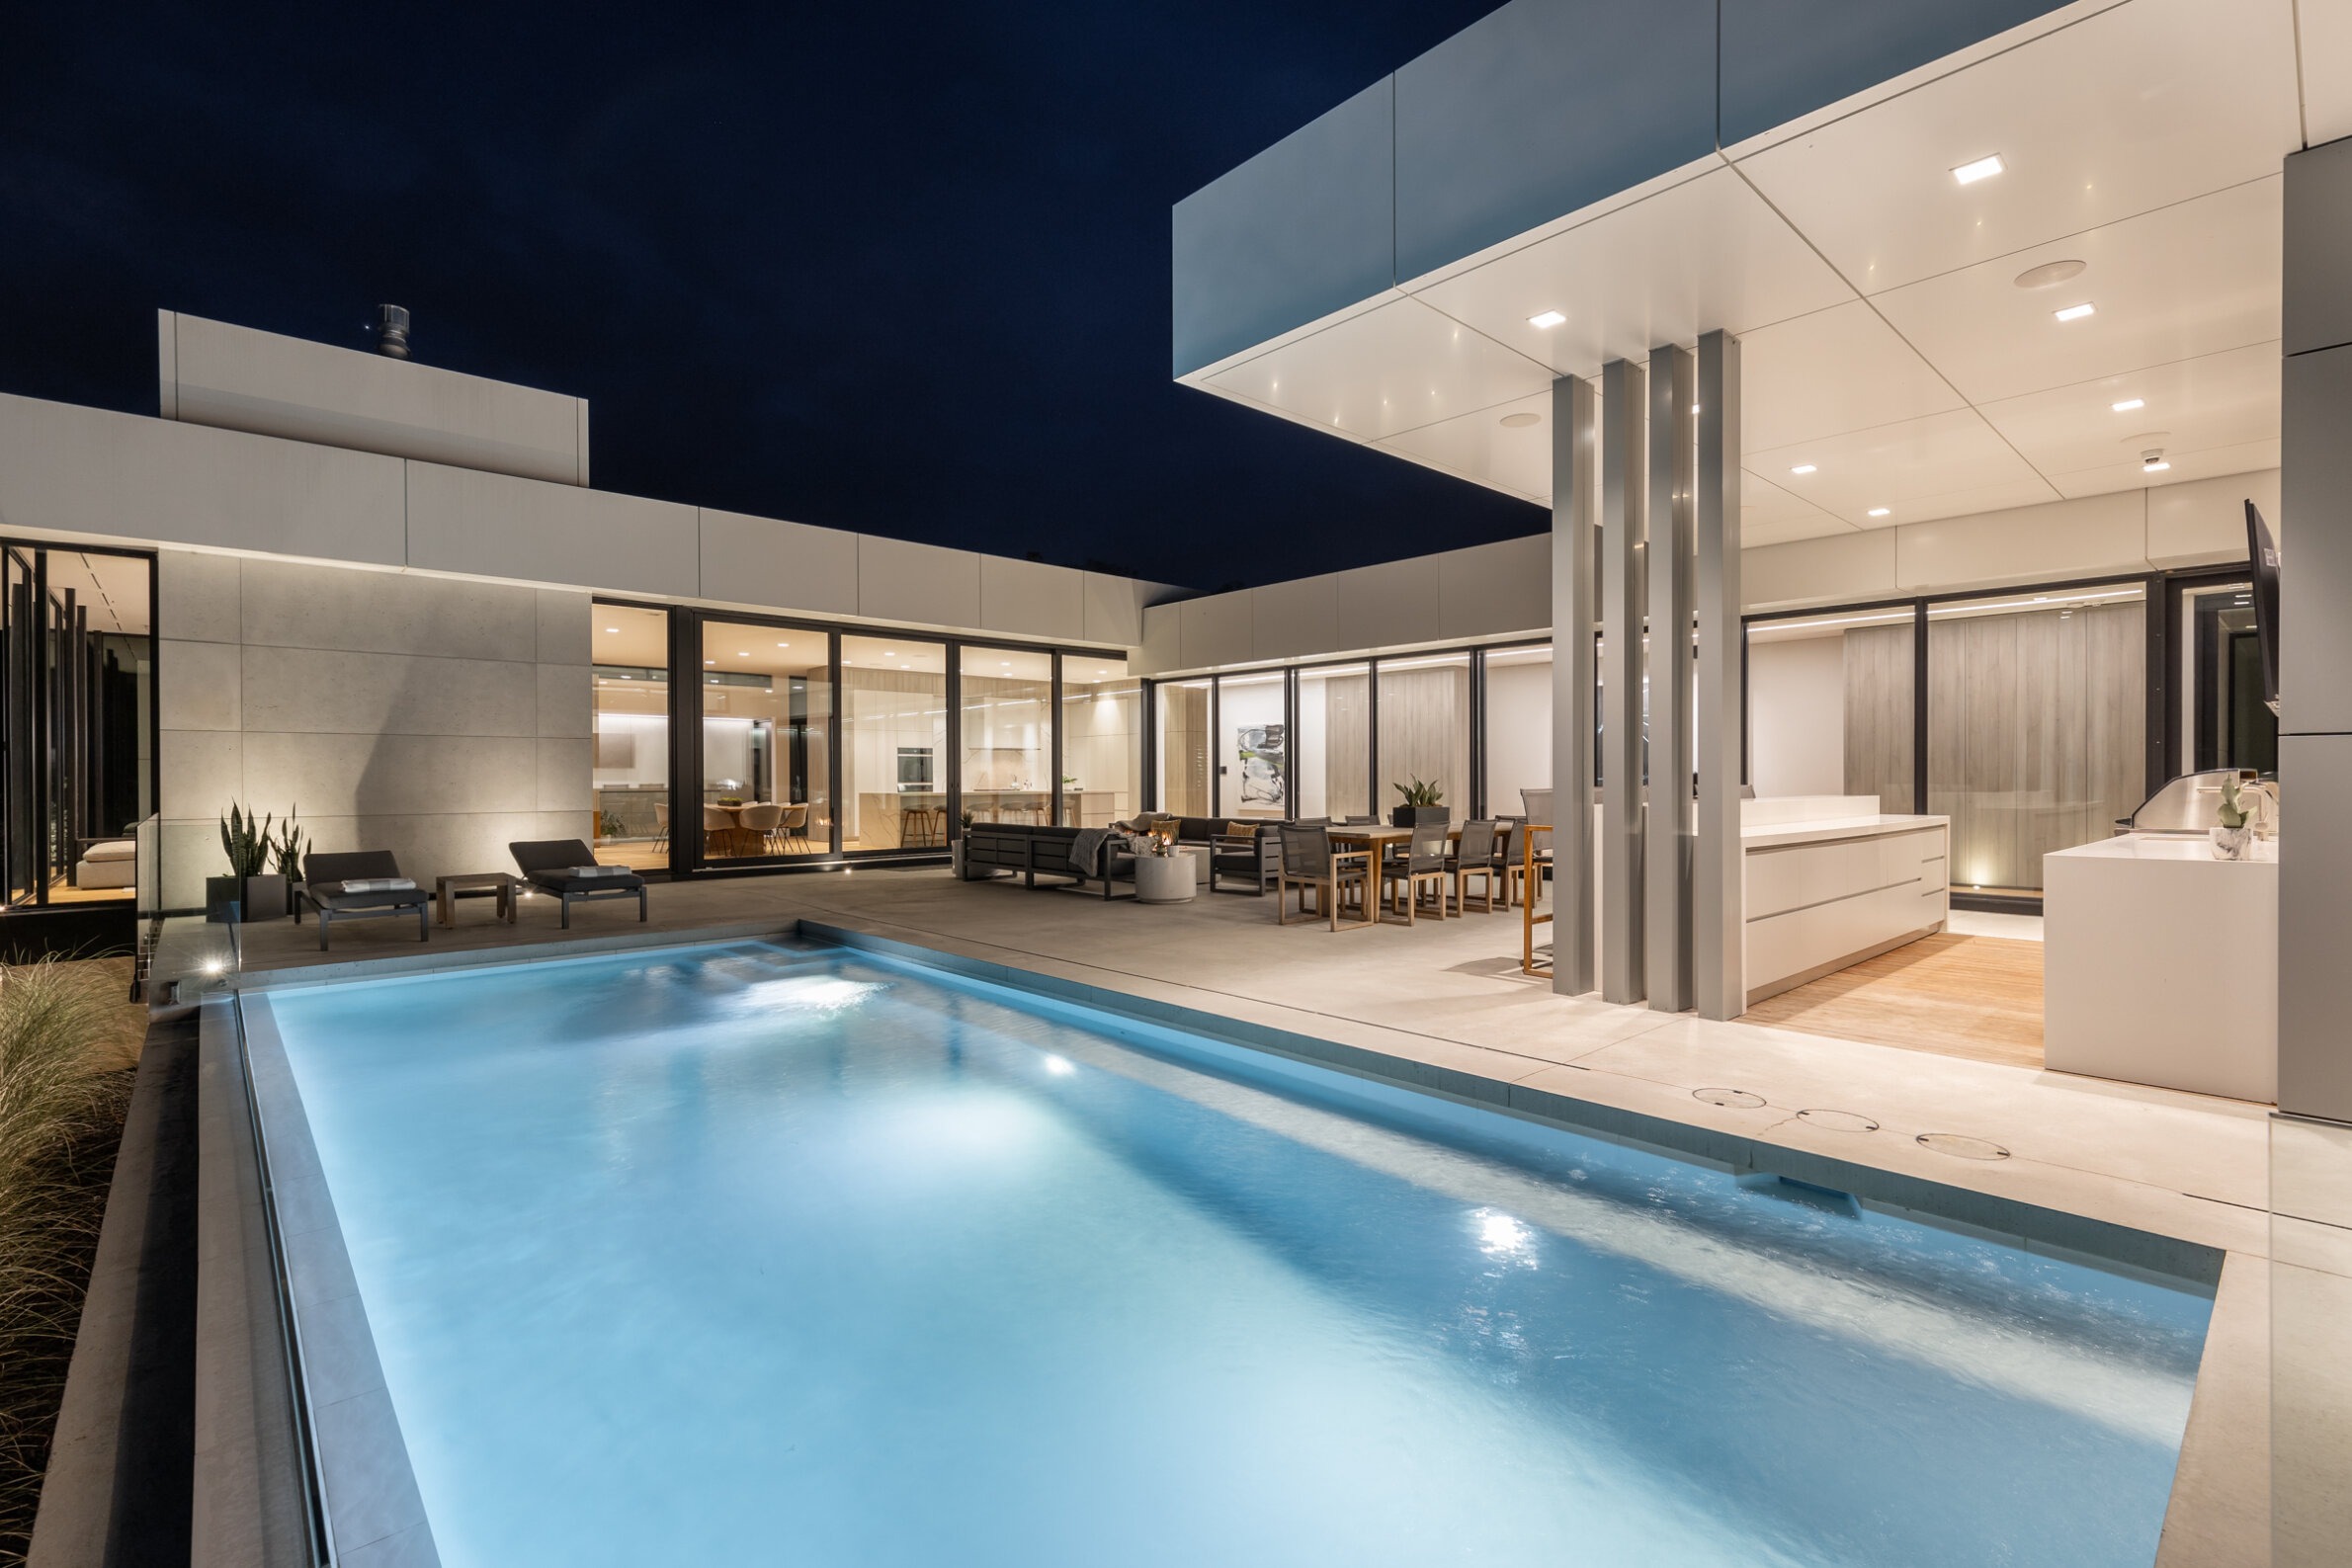 A modern house with an outdoor pool lit at night, sleek architecture, large windows, and a comfortable patio area with furniture and lighting.